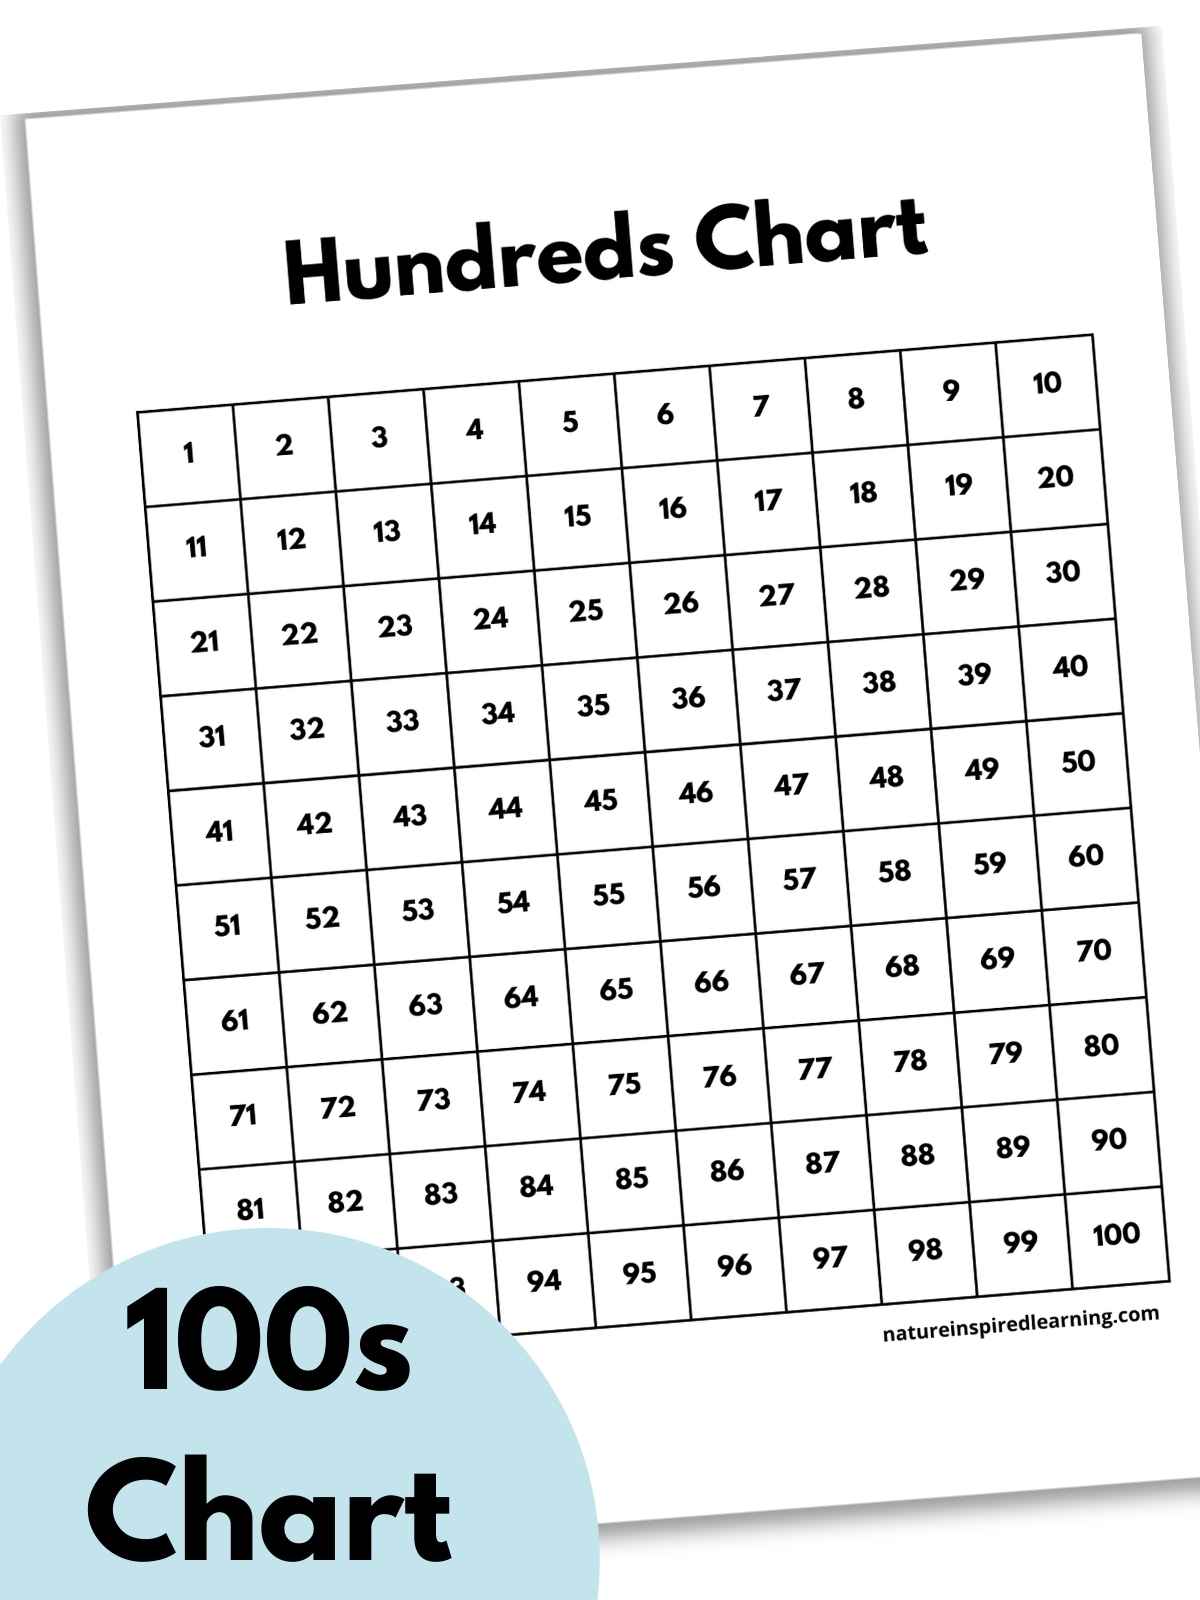 filled in hundred chart printable all black and white slanted with text overlay on top of printable on a light blue circle bottom left corner